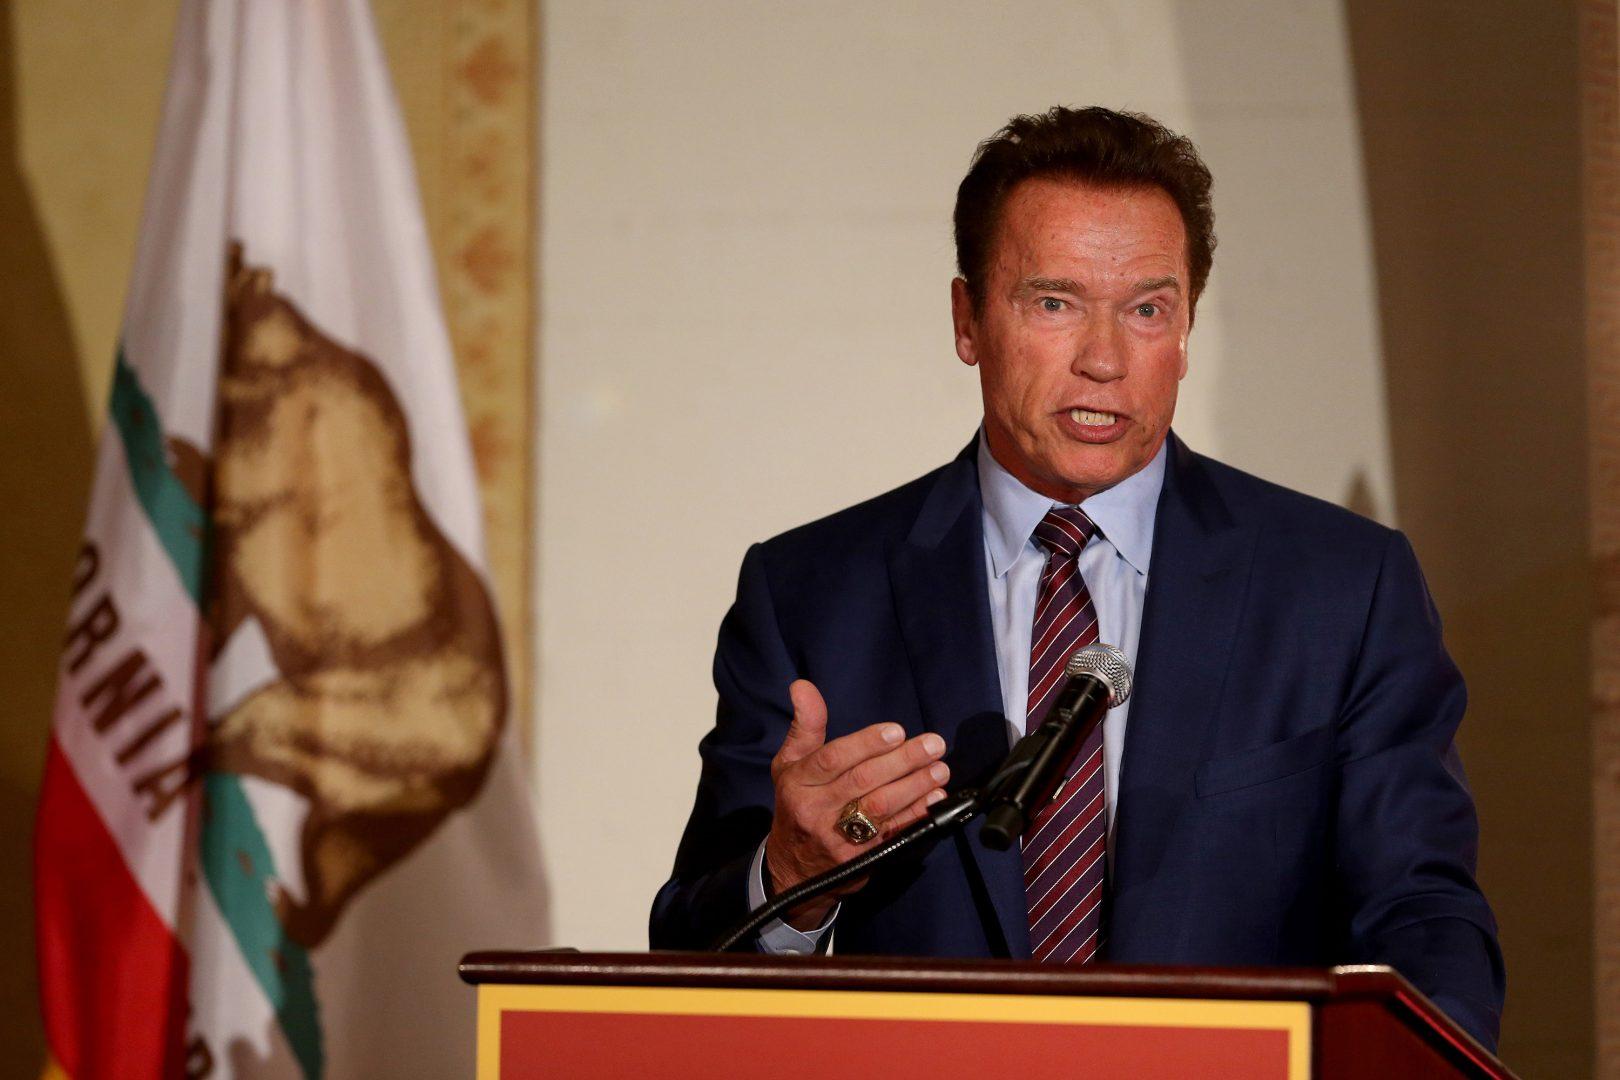 Former+California+Governor+Arnold+Schwarzenegger+speaks+on+the+Los+Angeles+campus+of+USC+on+April+5%2C+2017.+%28Rick+Loomis%2FLos+Angeles+Times%2FTNS%29